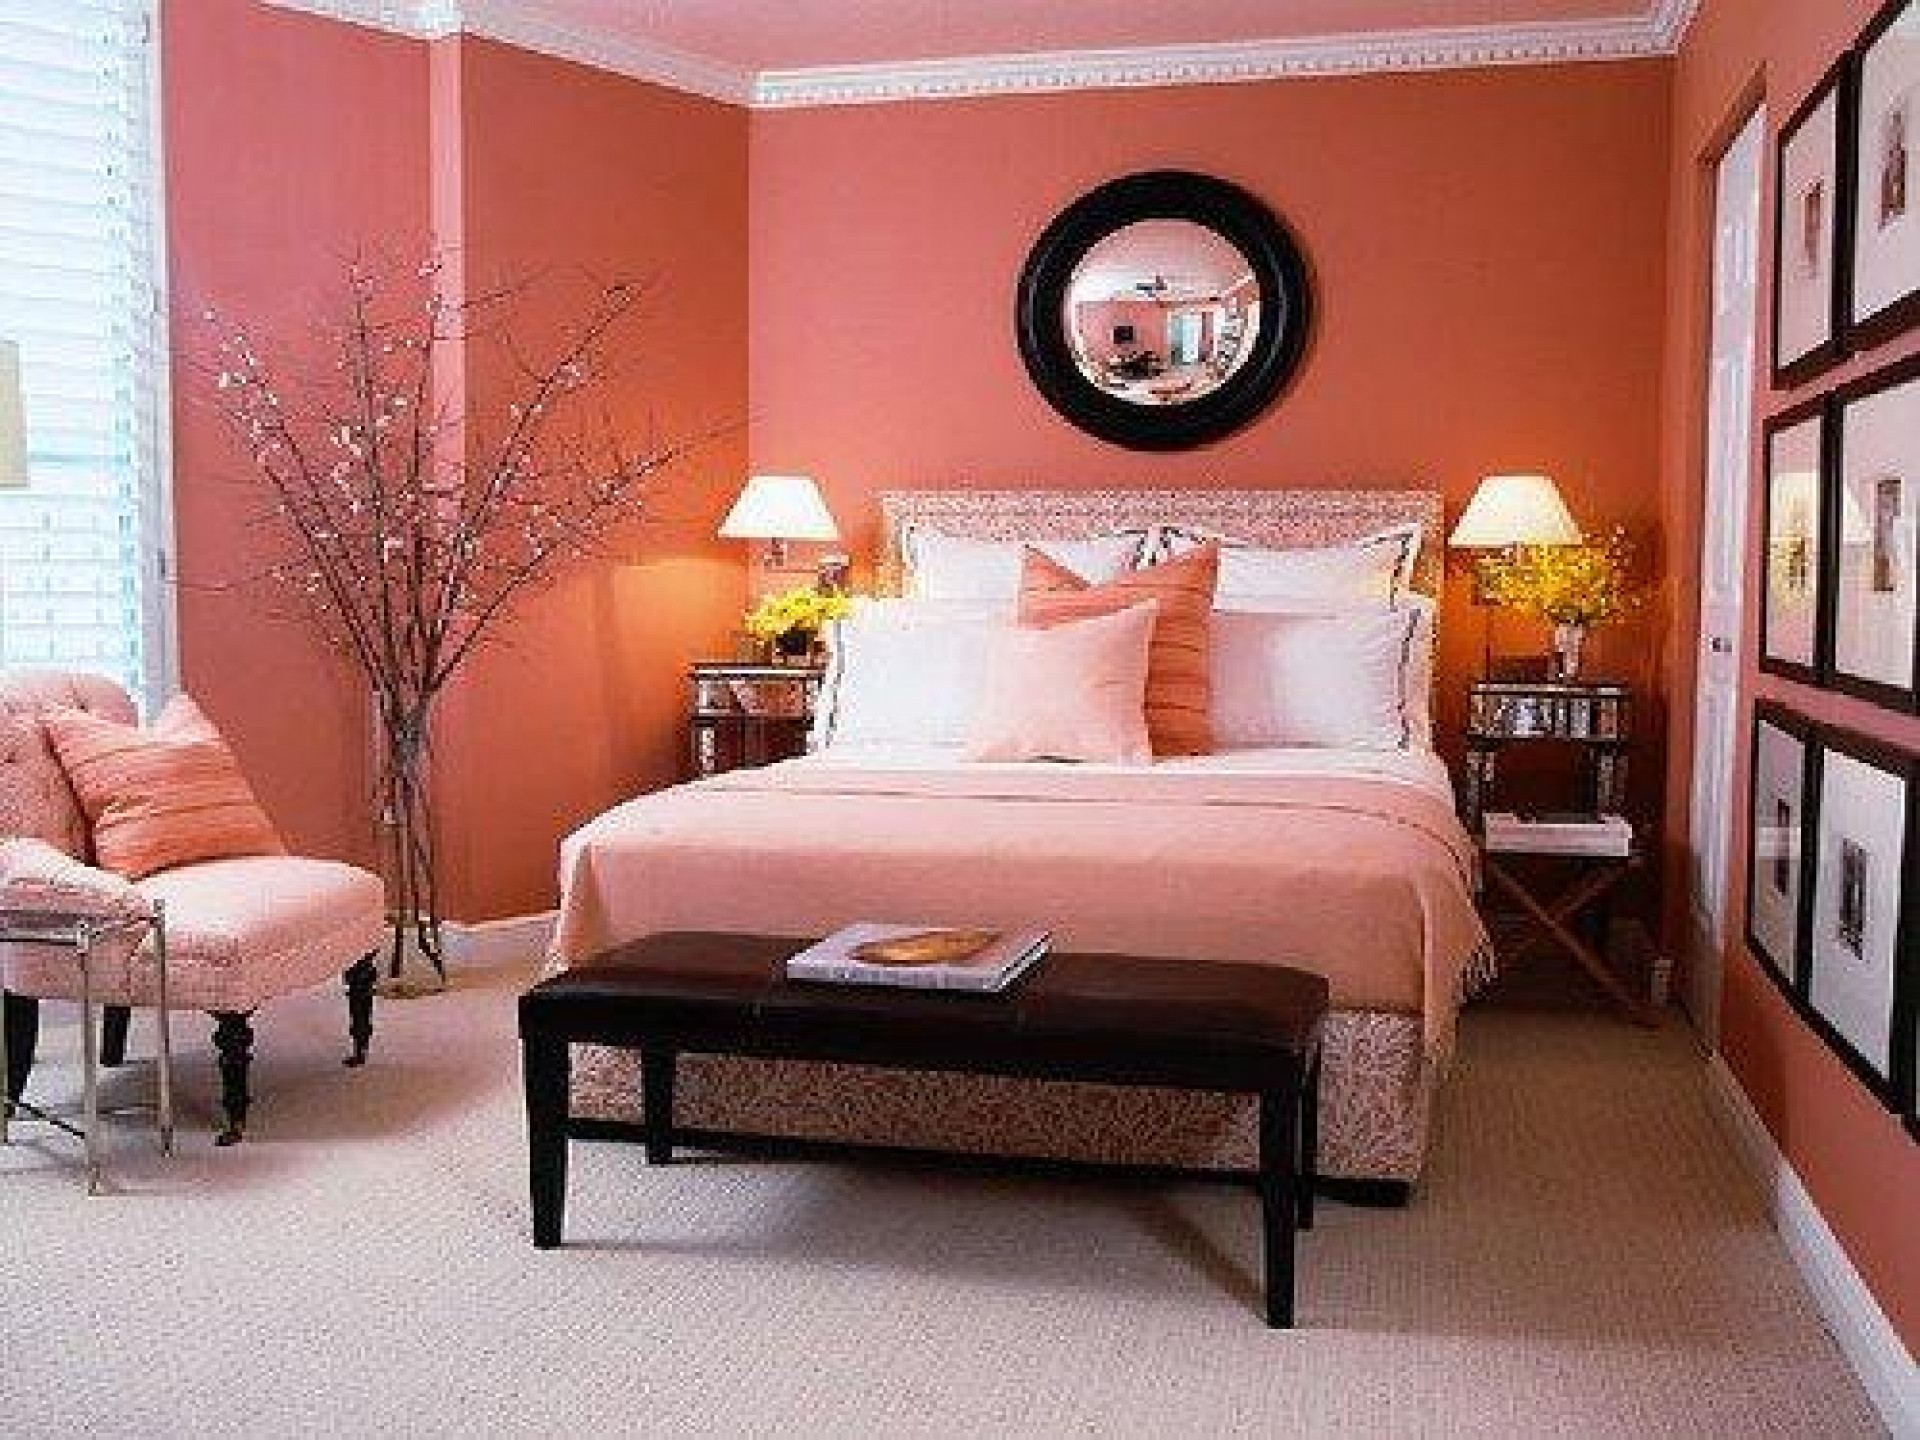 Small Bedroom Ideas For Adults
 25 Beautiful Bedroom Ideas For Your Home – The WoW Style